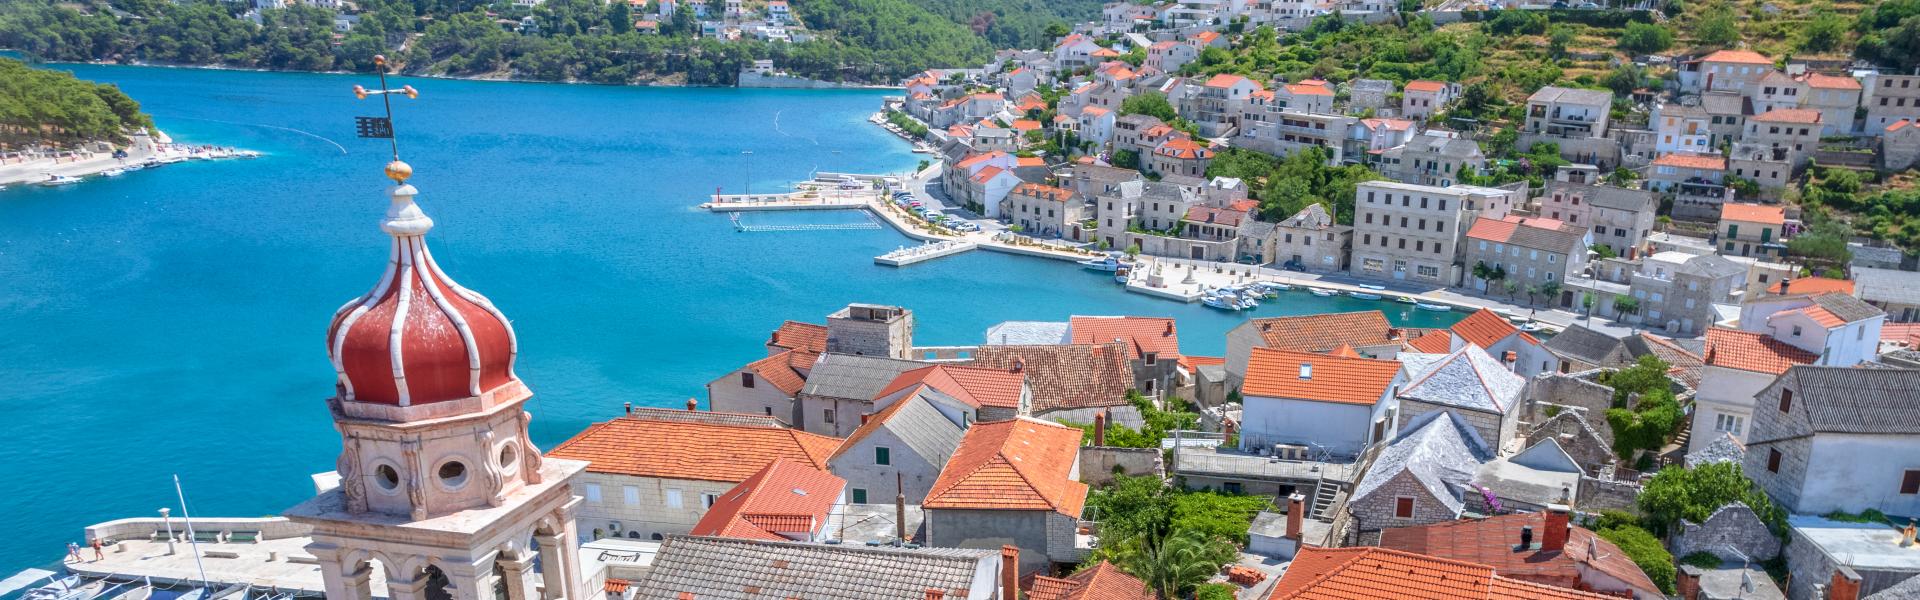 High angle view of the harbor town of Pucisca, one of the prettiest villages in Europe, on Brac island, Split-Dalmatia County, southern Croatia.